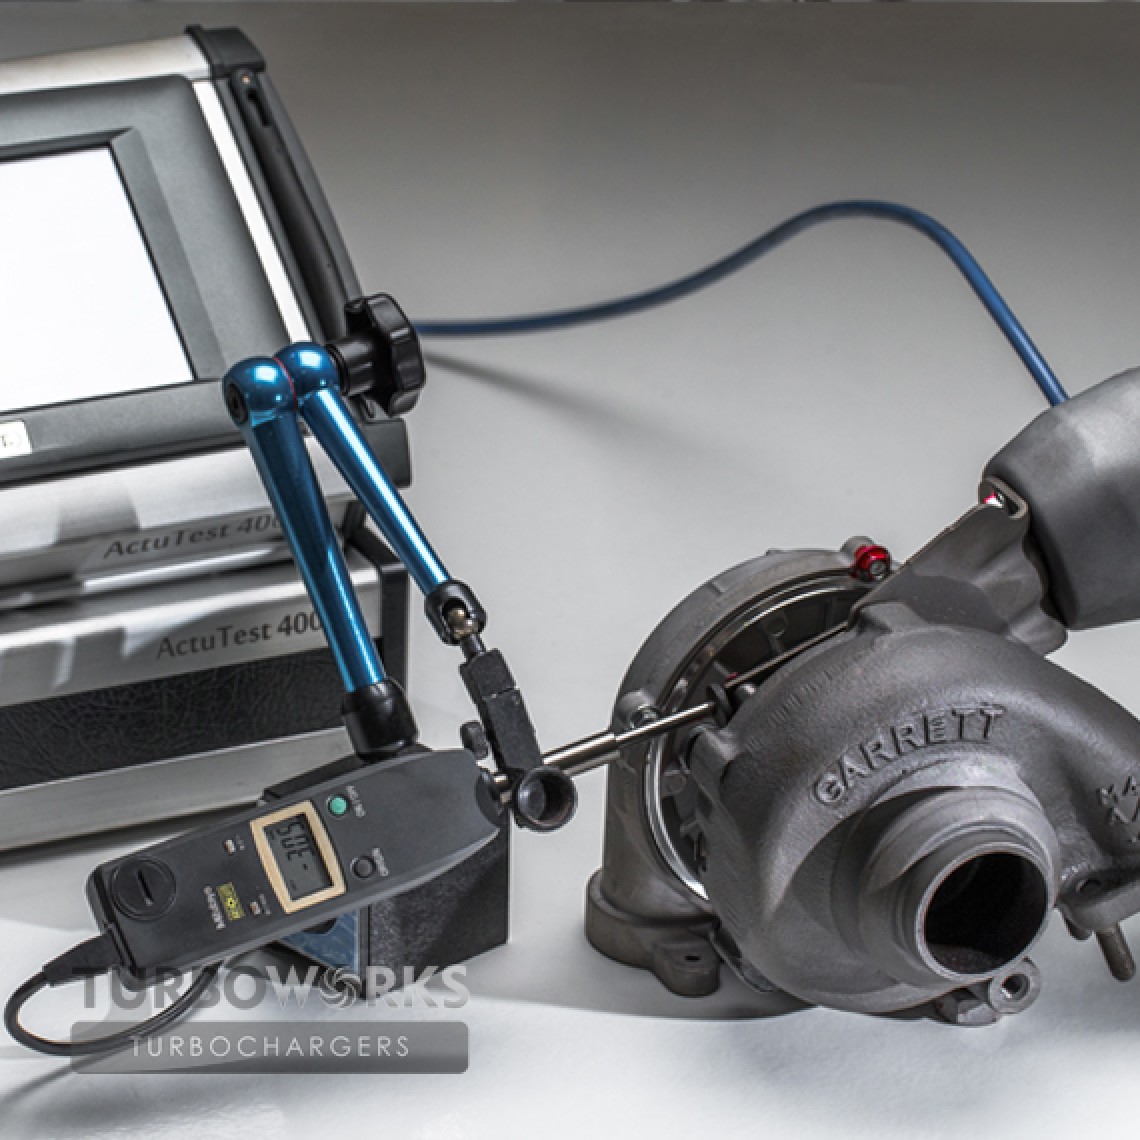 Turbocharger services in UK